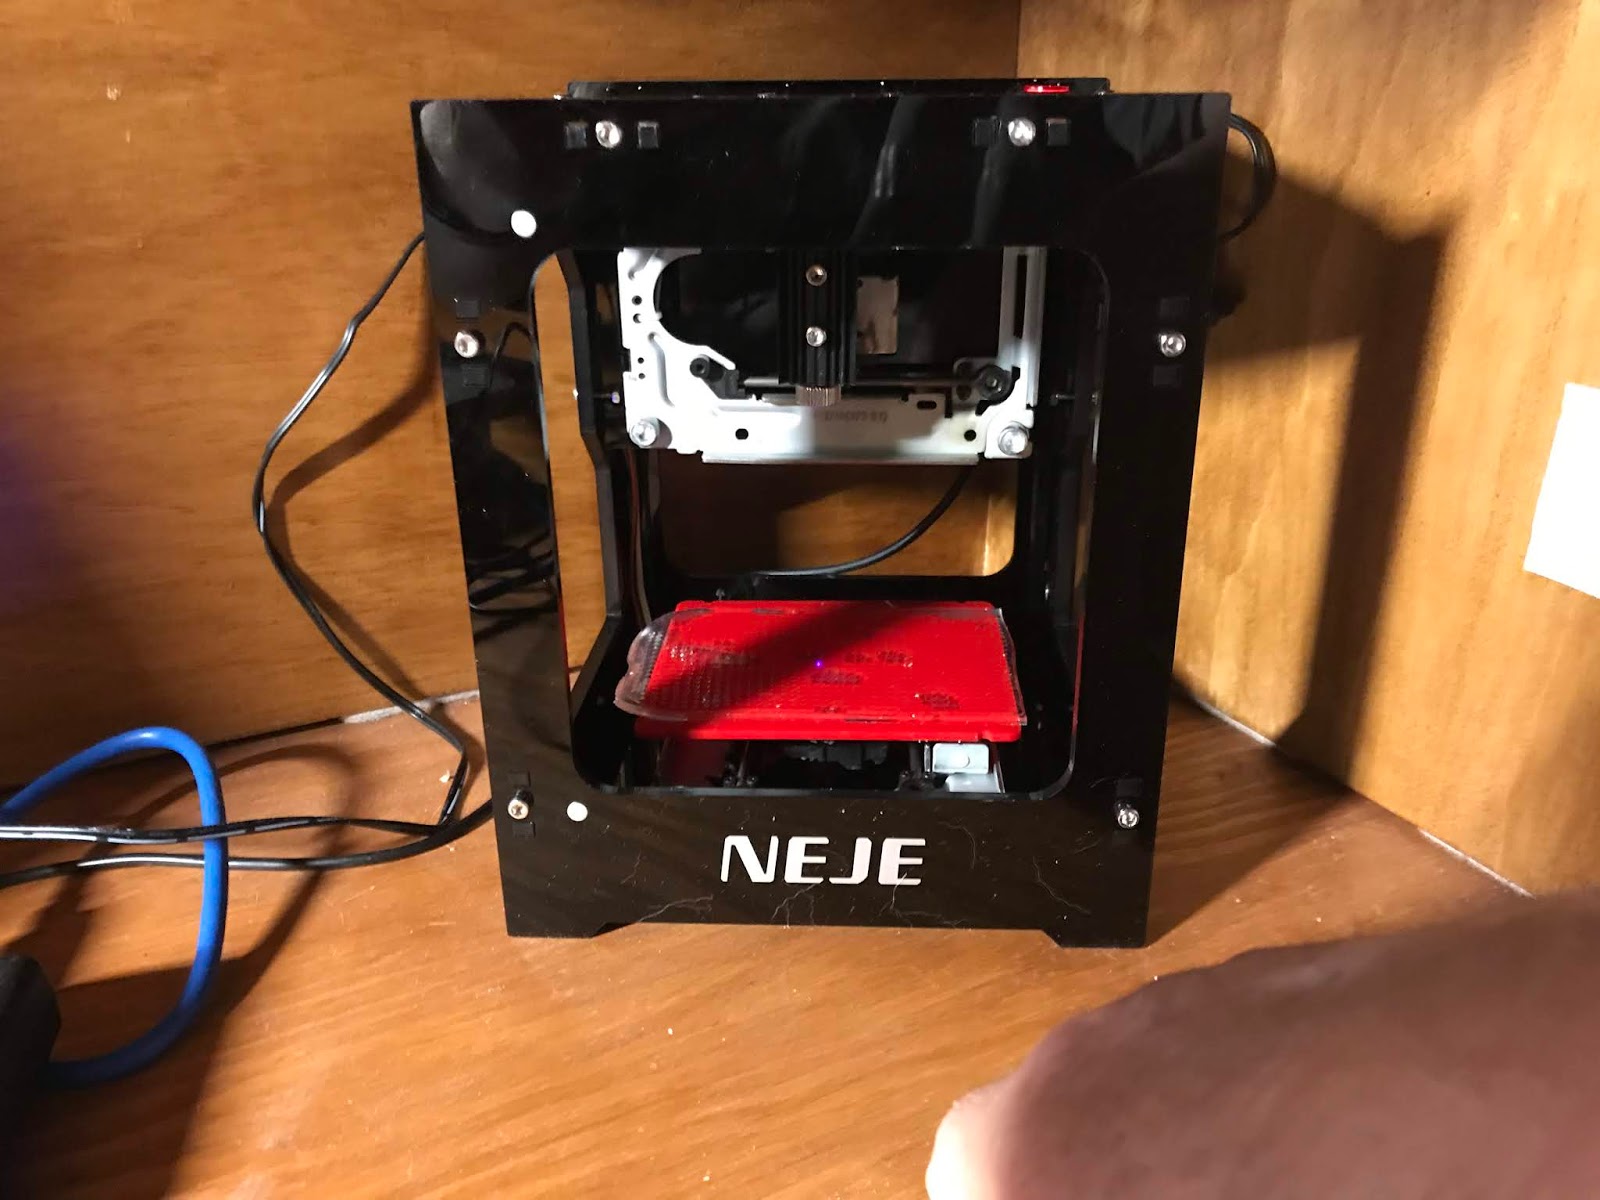 Small Workshop Chronicles Fooling Around With The Neje Dk8kz Laser Engraver